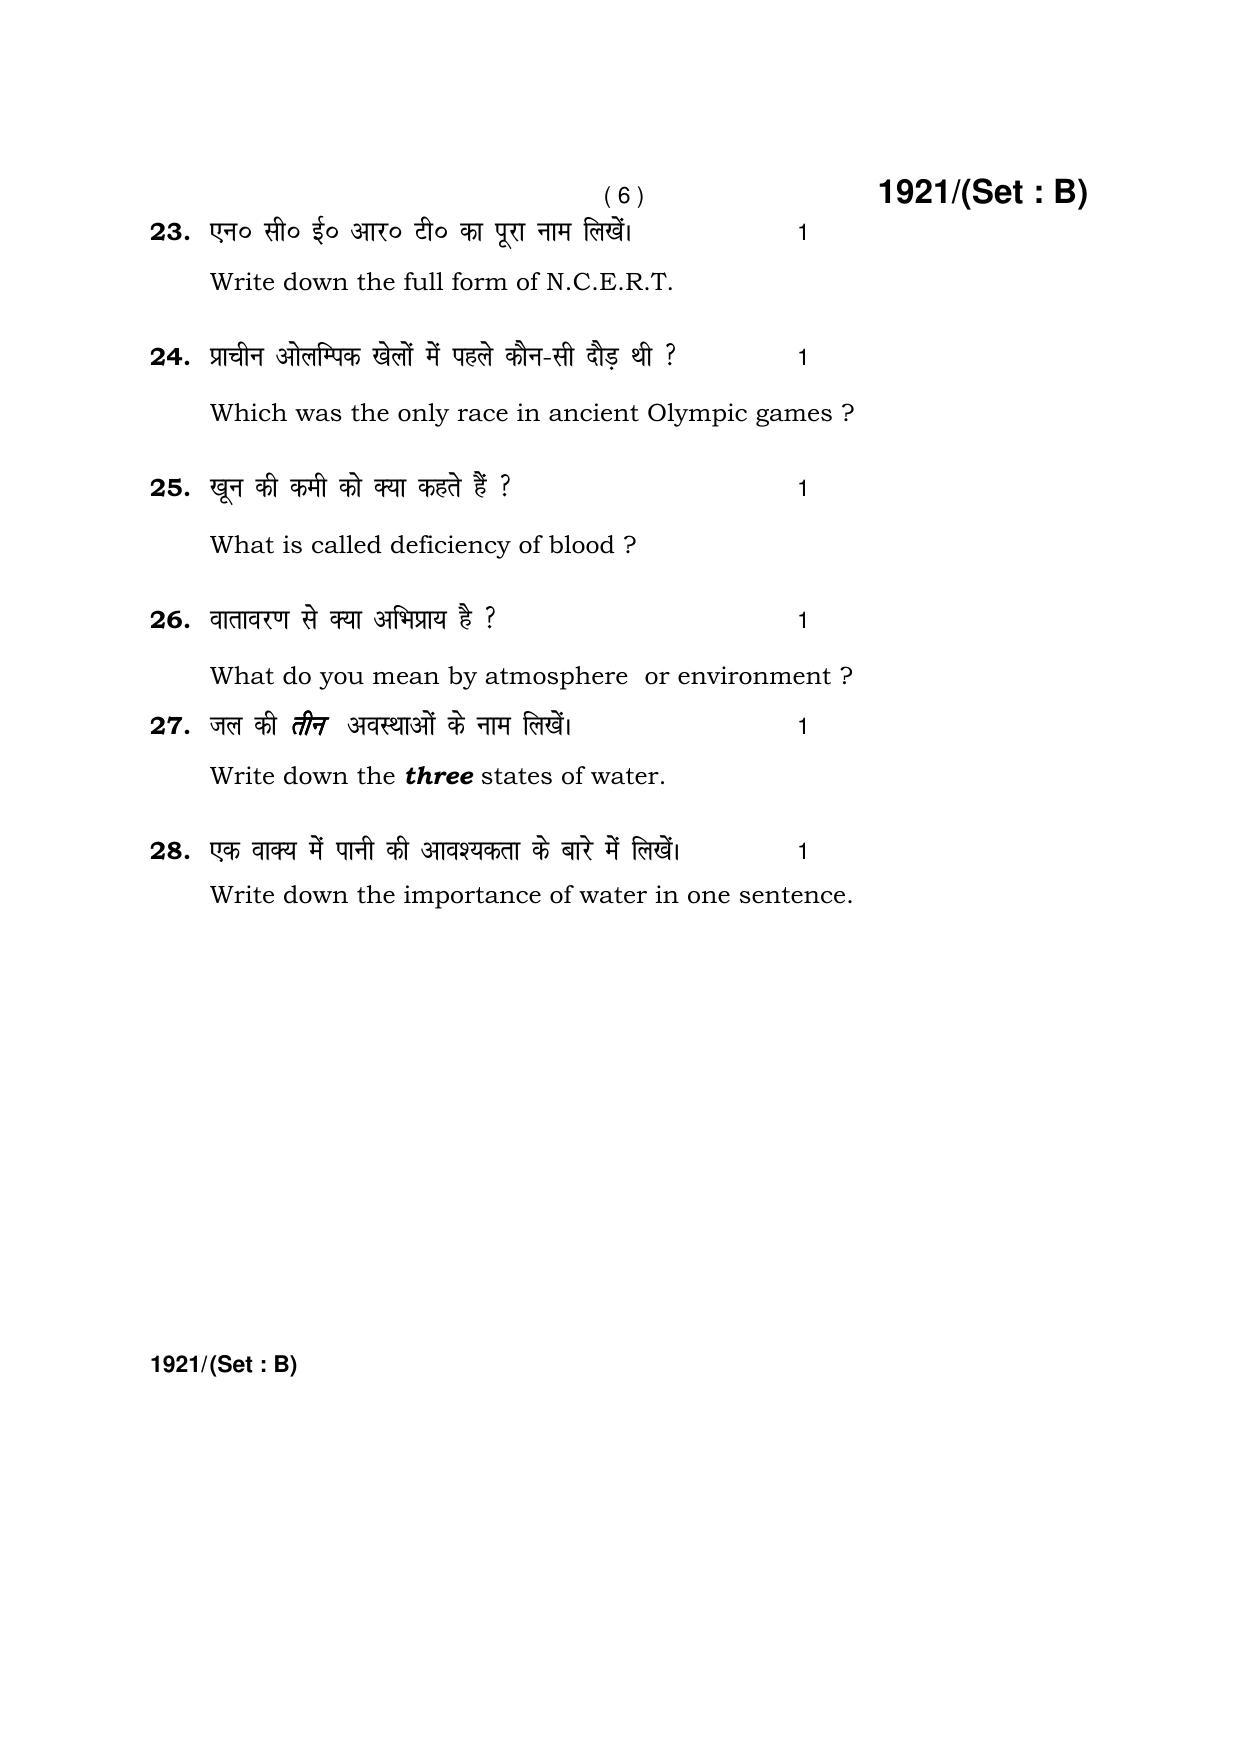 Haryana Board HBSE Class 10 Health & Physical Education -B 2017 Question Paper - Page 6